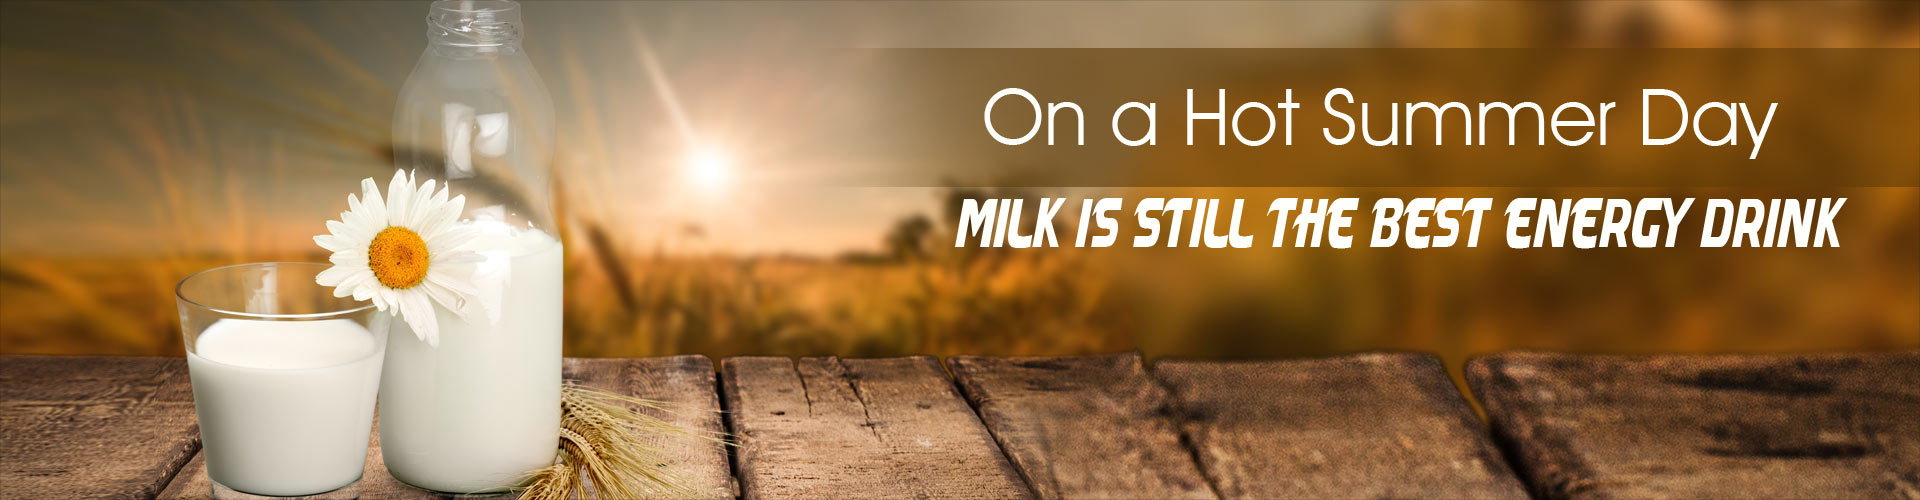 On a Hot Summer Day, Milk is Still the Best Energy Drink